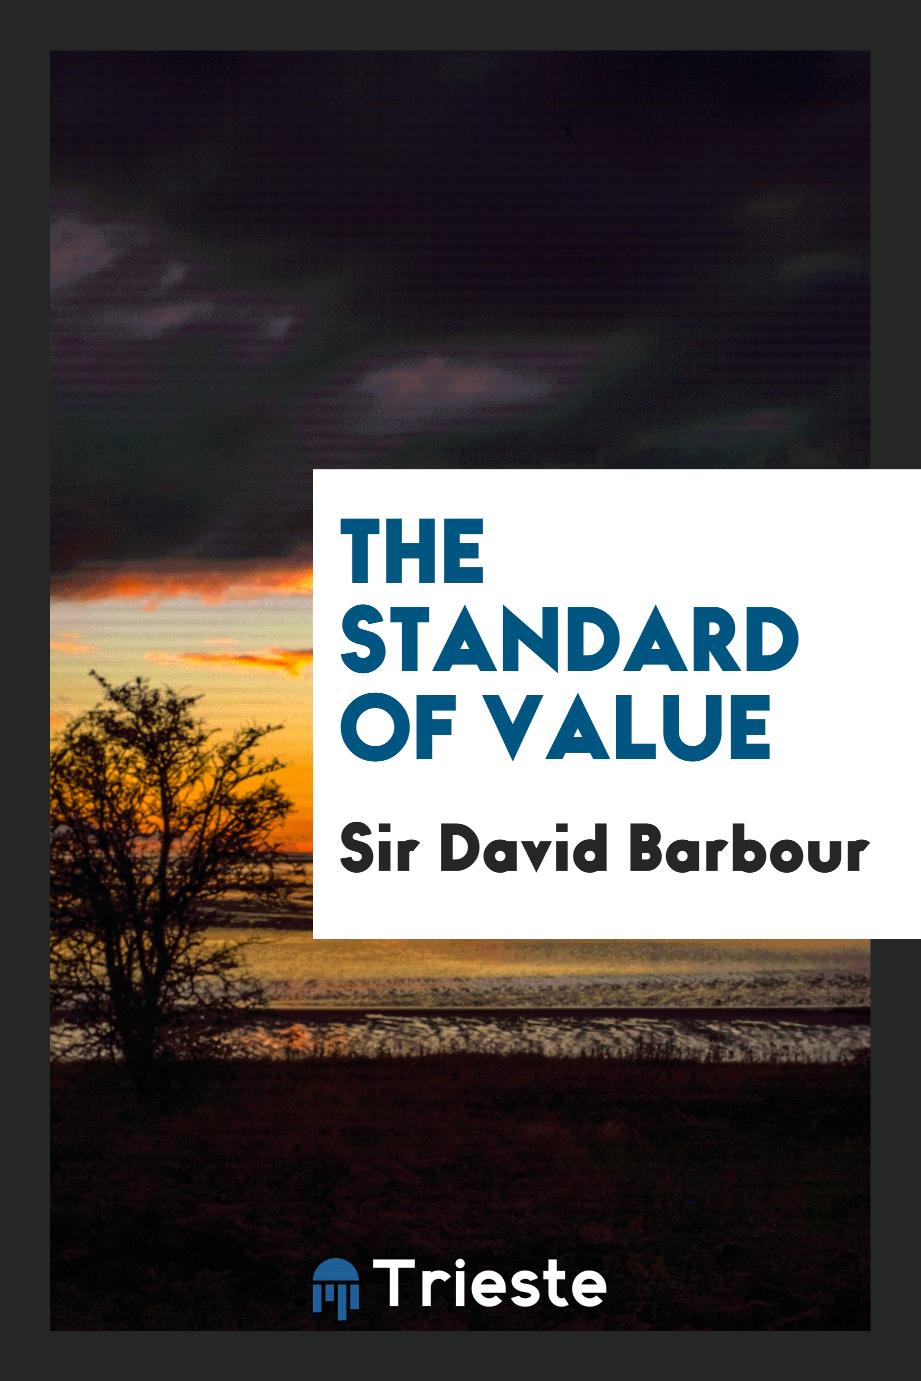 The standard of value